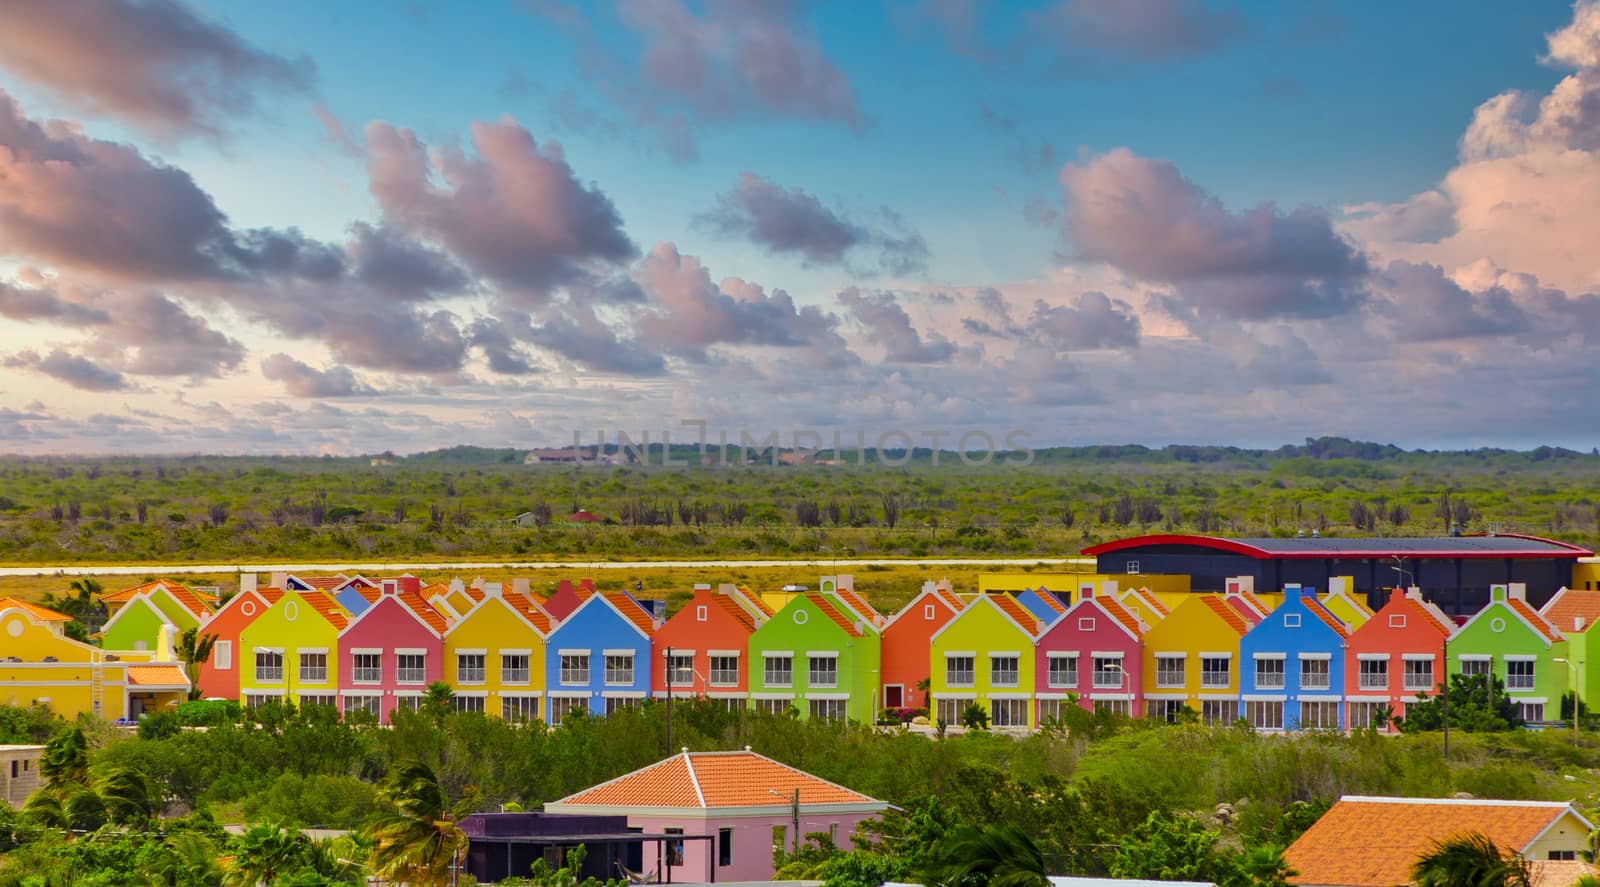 Colorful Cabanas on Curacao by dbvirago